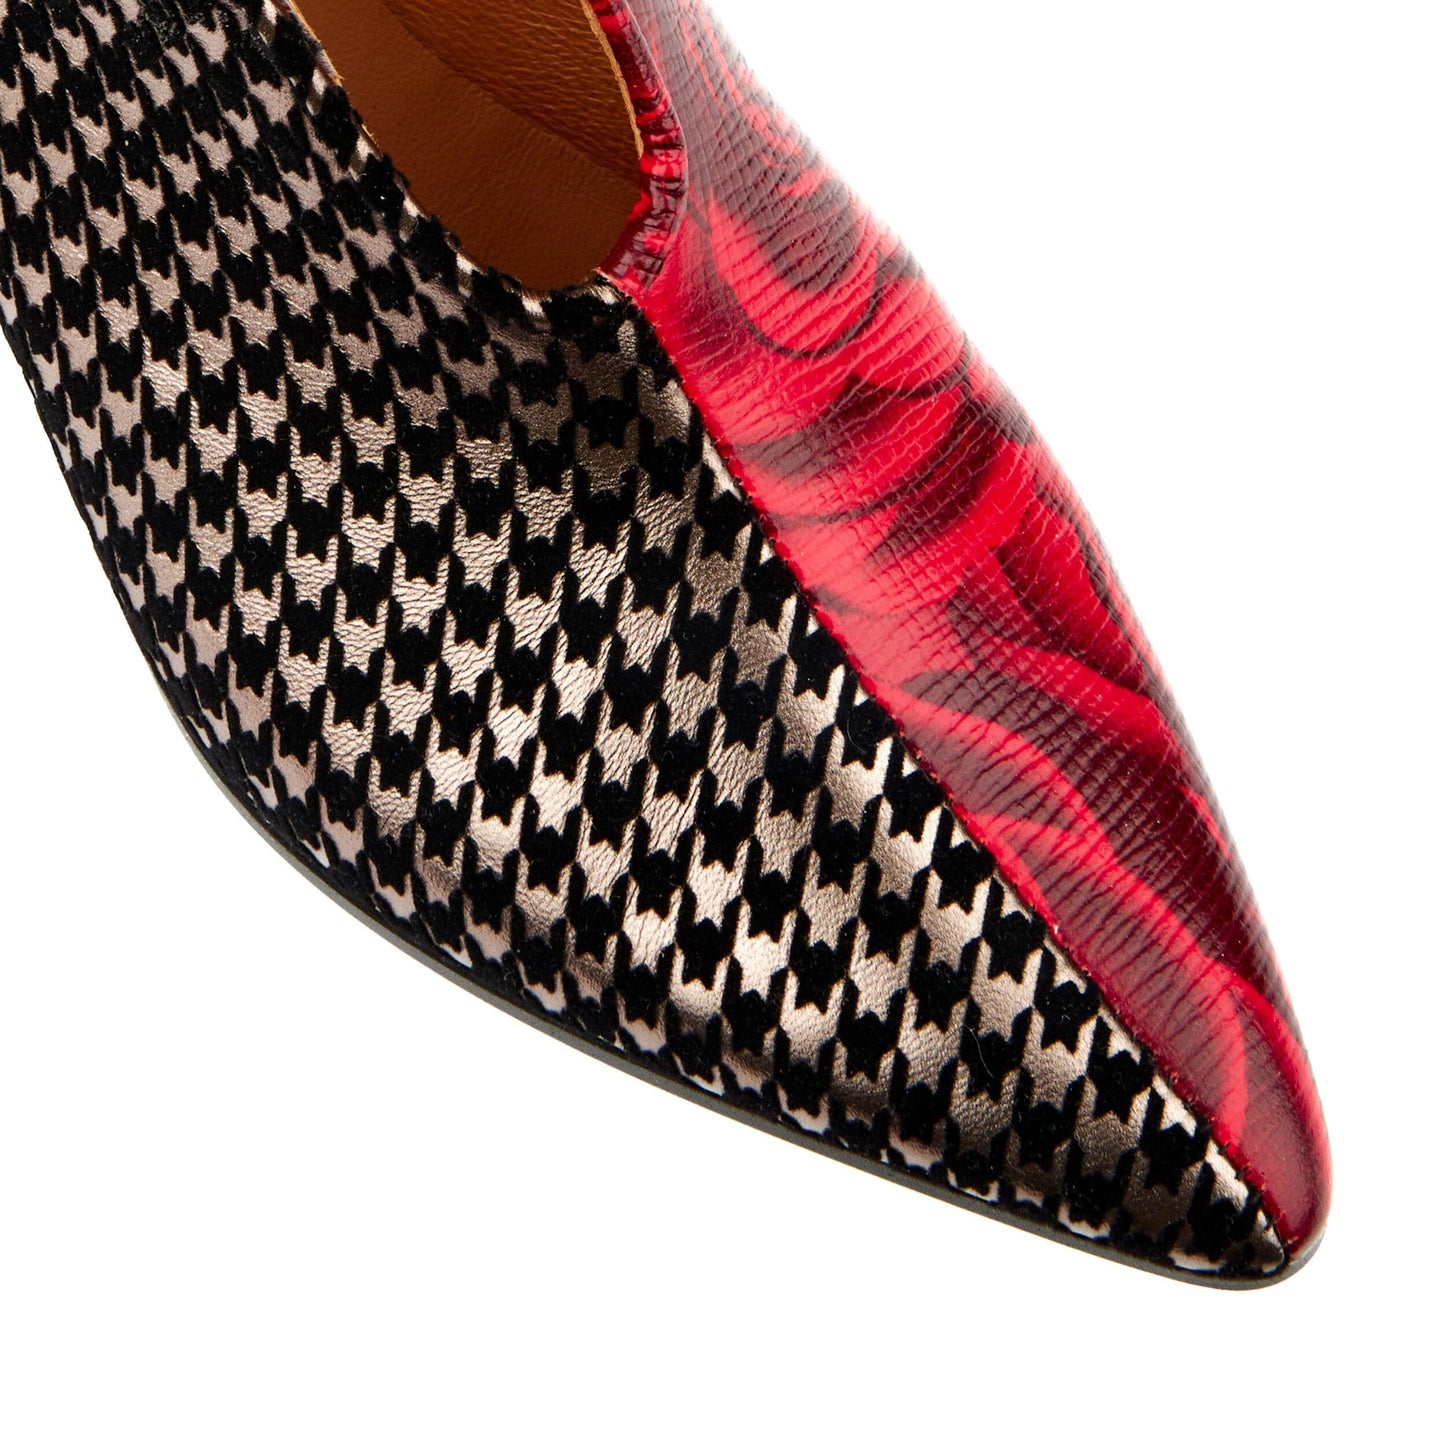 Charlotte - Red Rose & Houndstooth Womens Heels Embassy London 